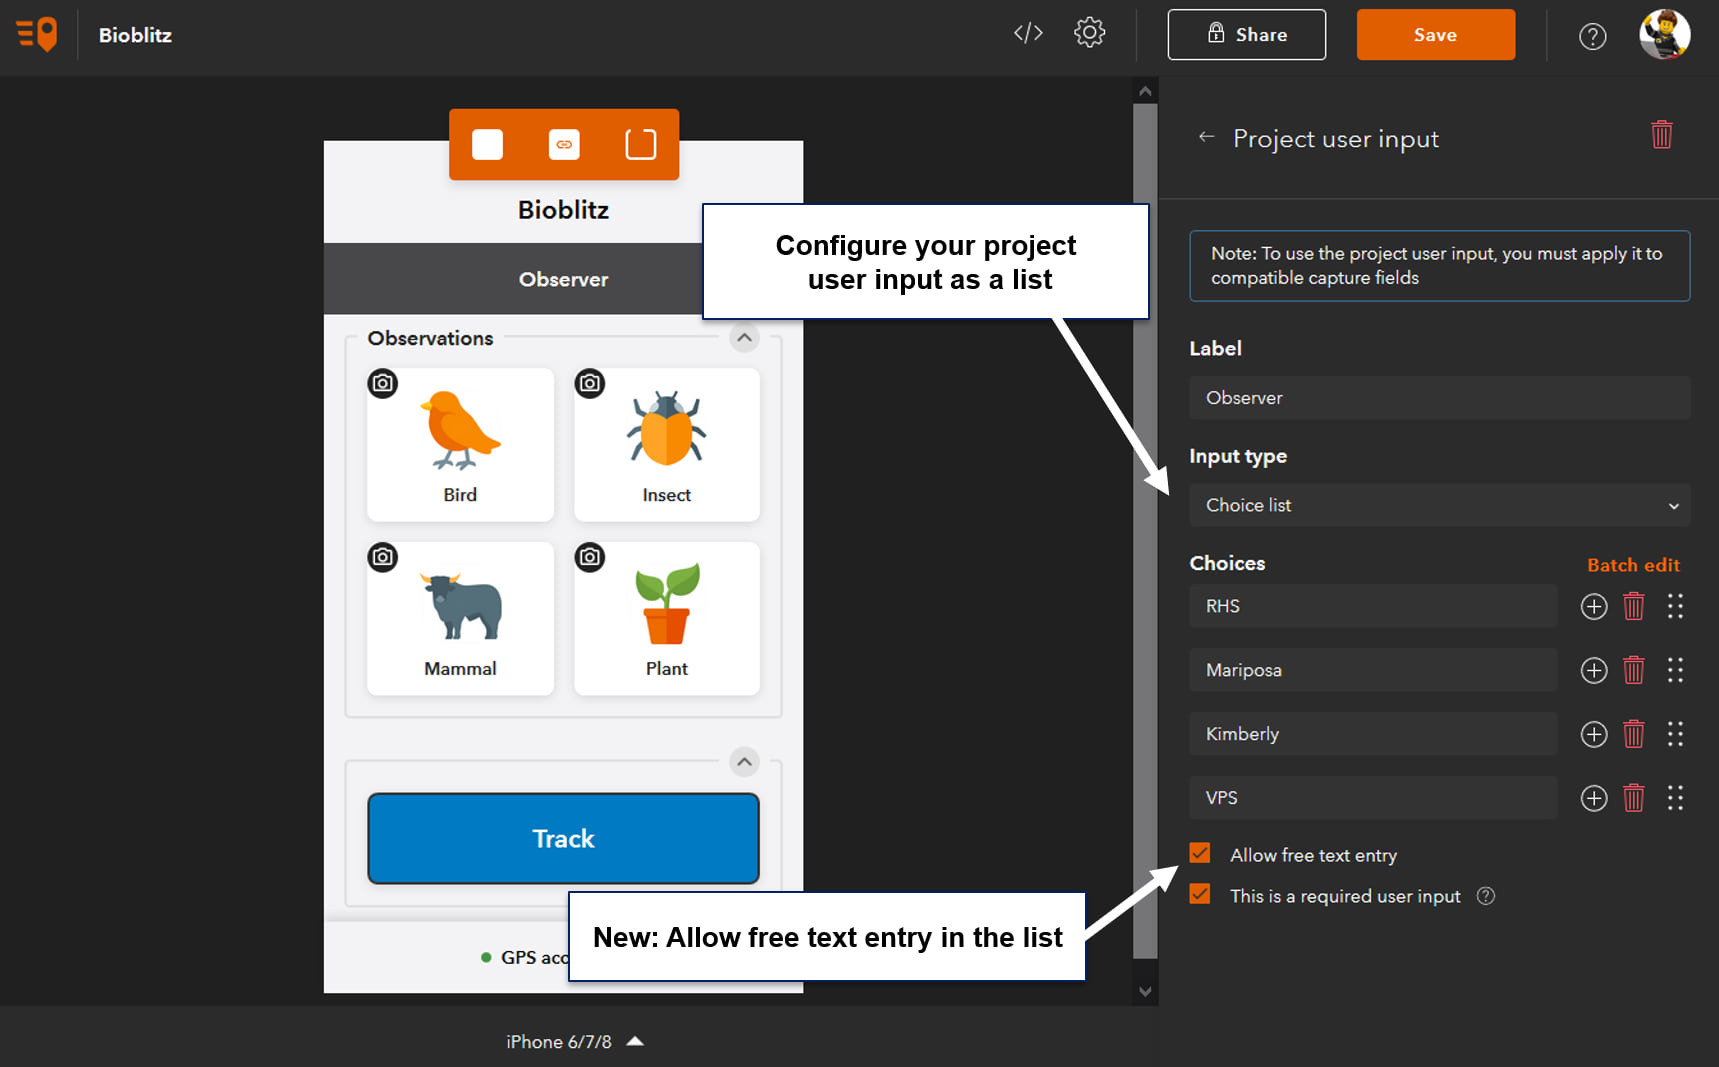 QuickCapture designer allows you to define free text entry in project user inputs